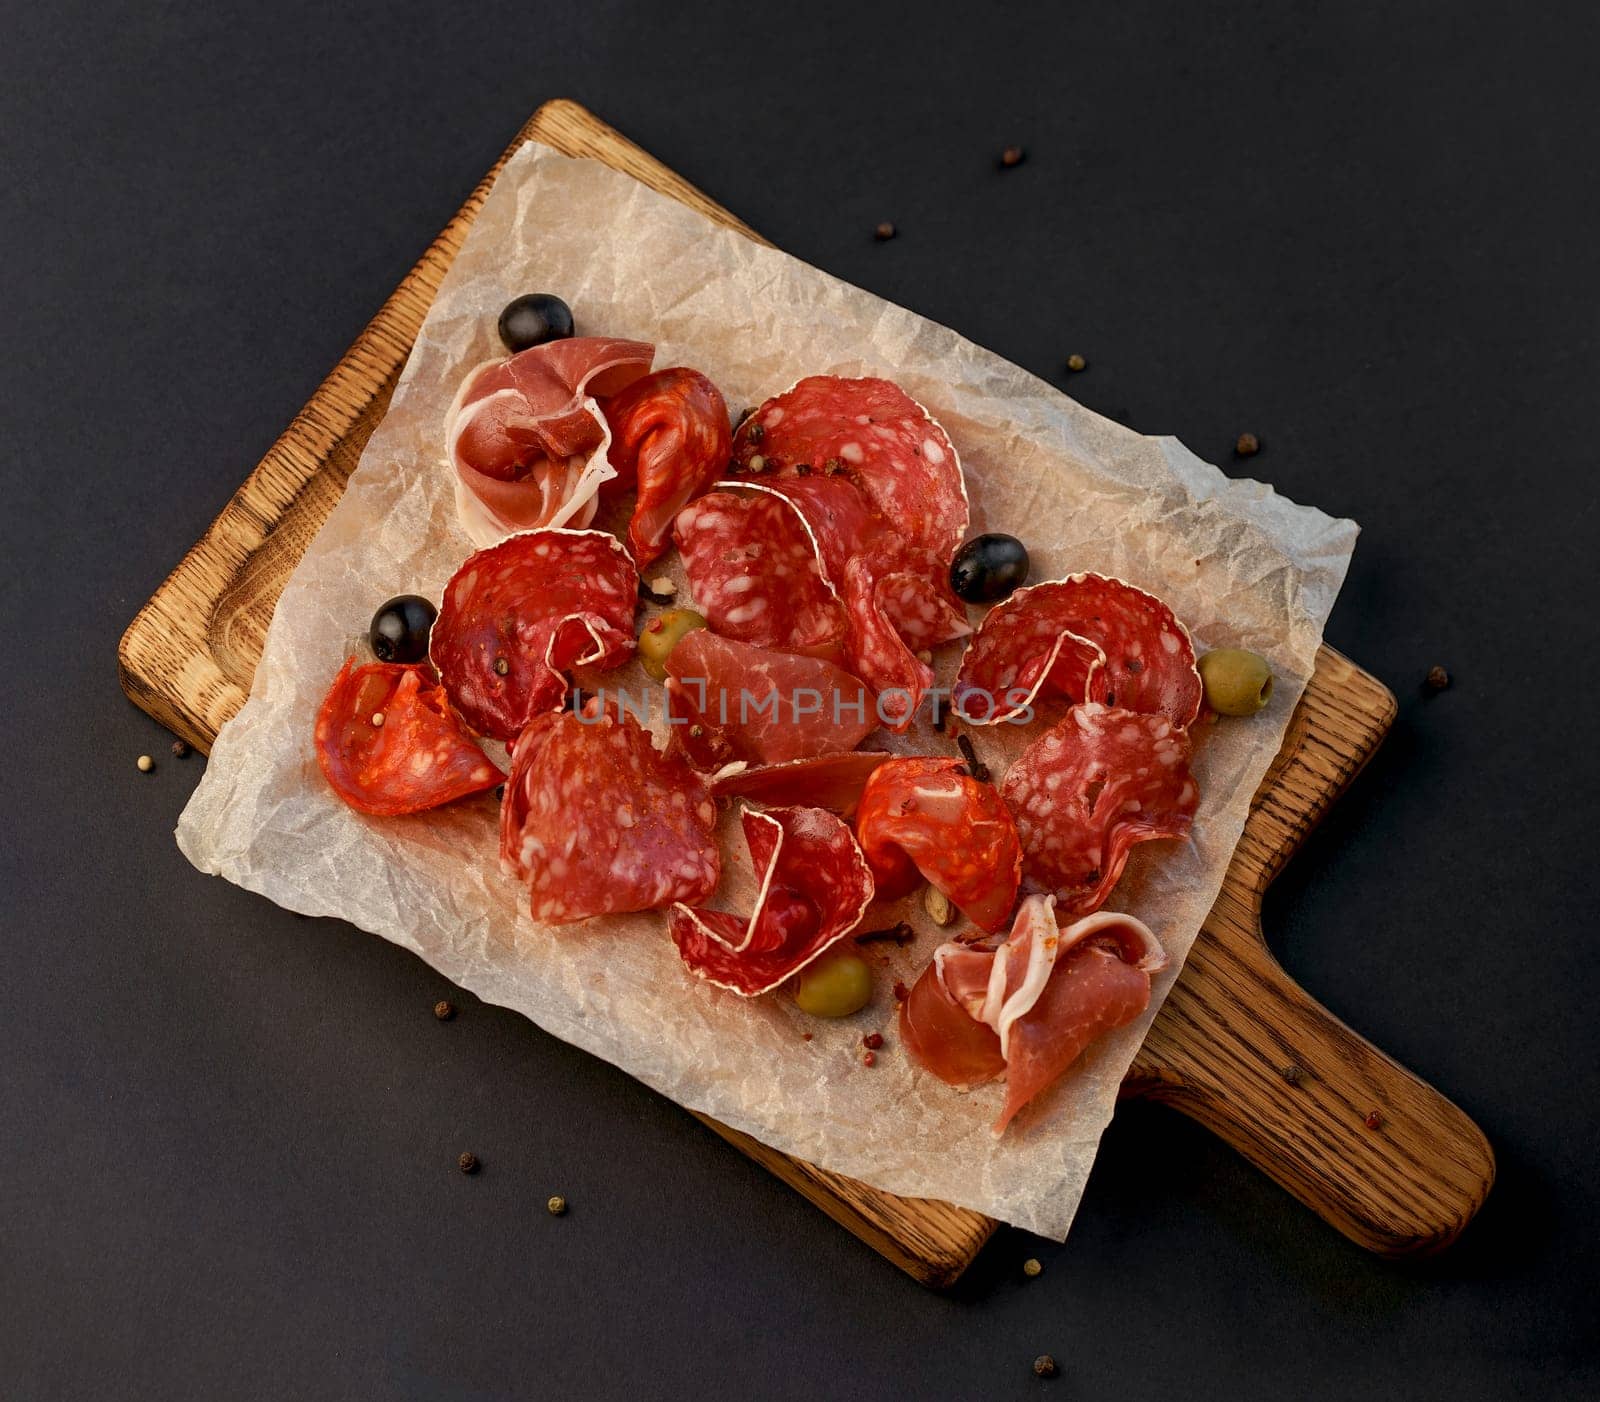 cold cuts - jamon, ham, salami on a wooden board on a black background